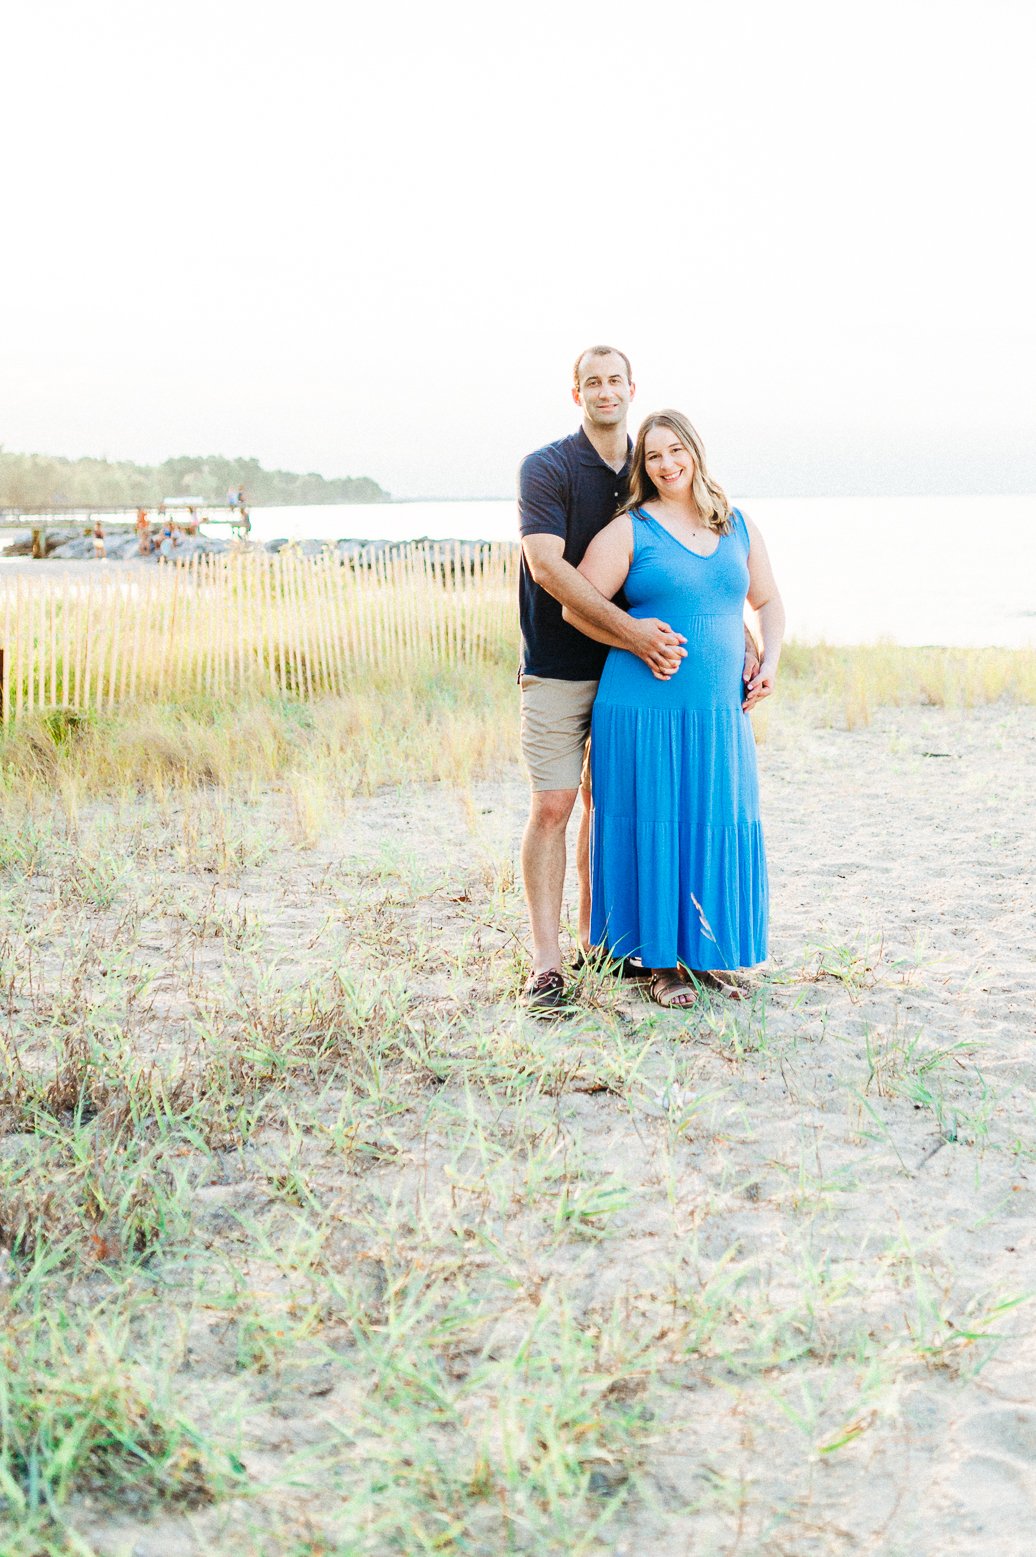 Engagement_Westmoreland_Summer_youseephotography_LeslieNick_blogpic00055a.jpg